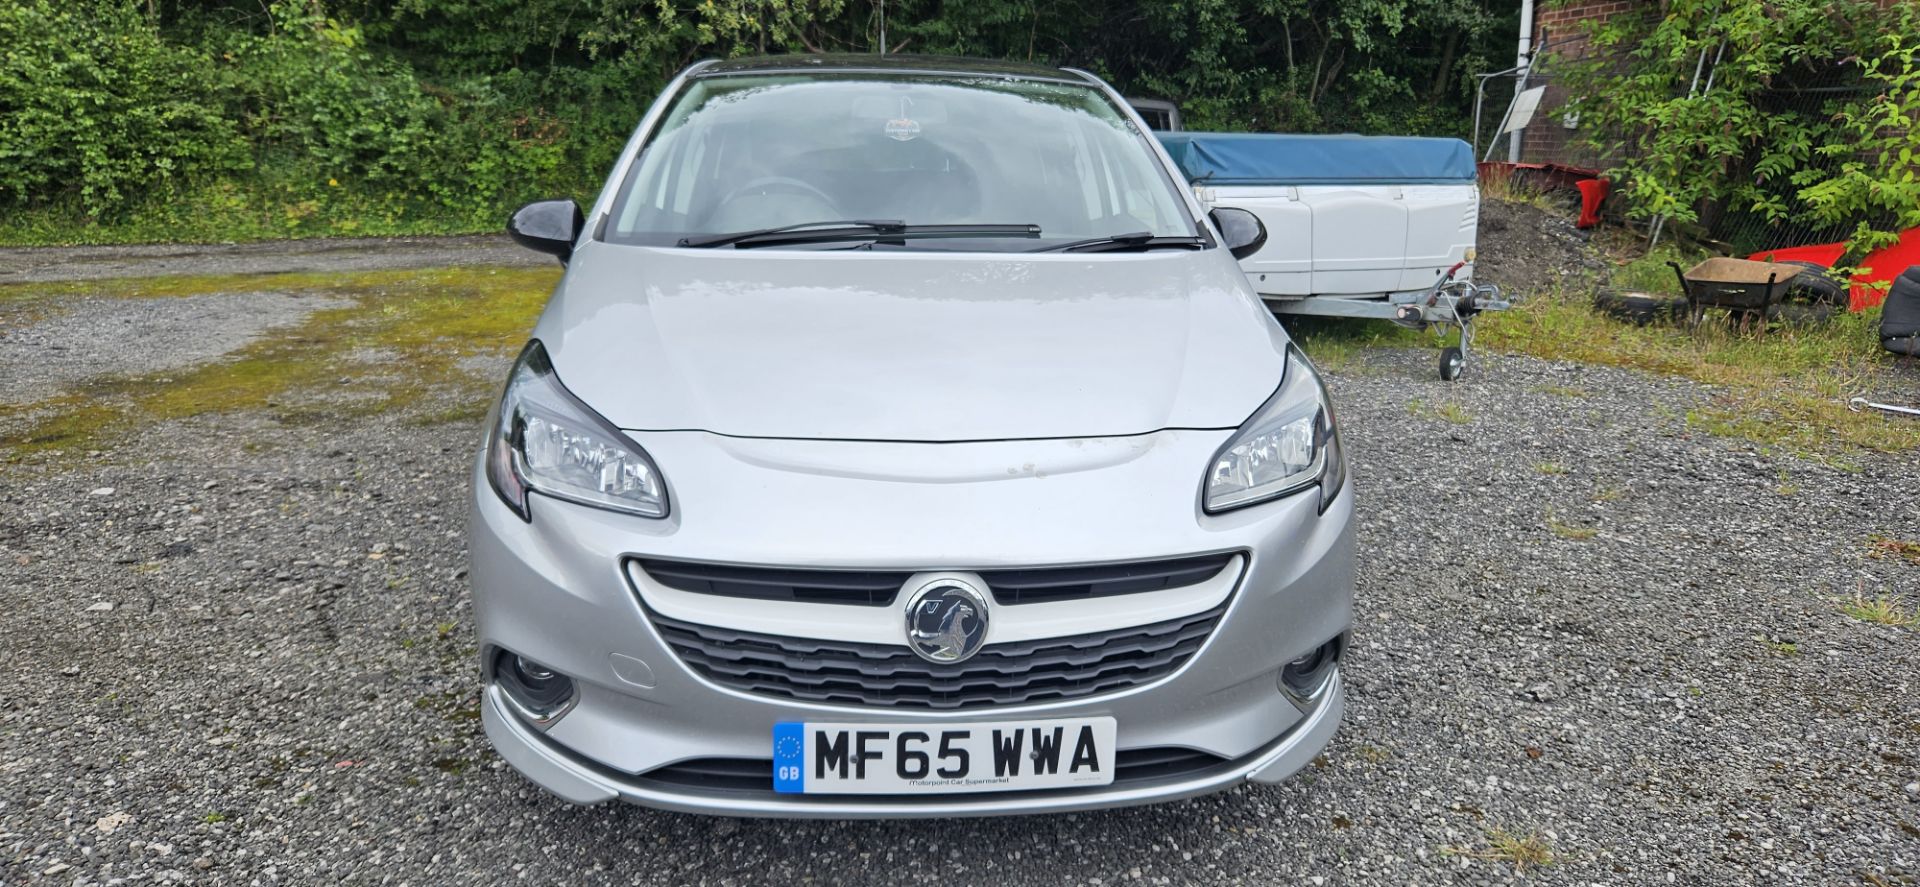 2015 VAUXHALL CORSA LIMITED EDITION - Image 2 of 7